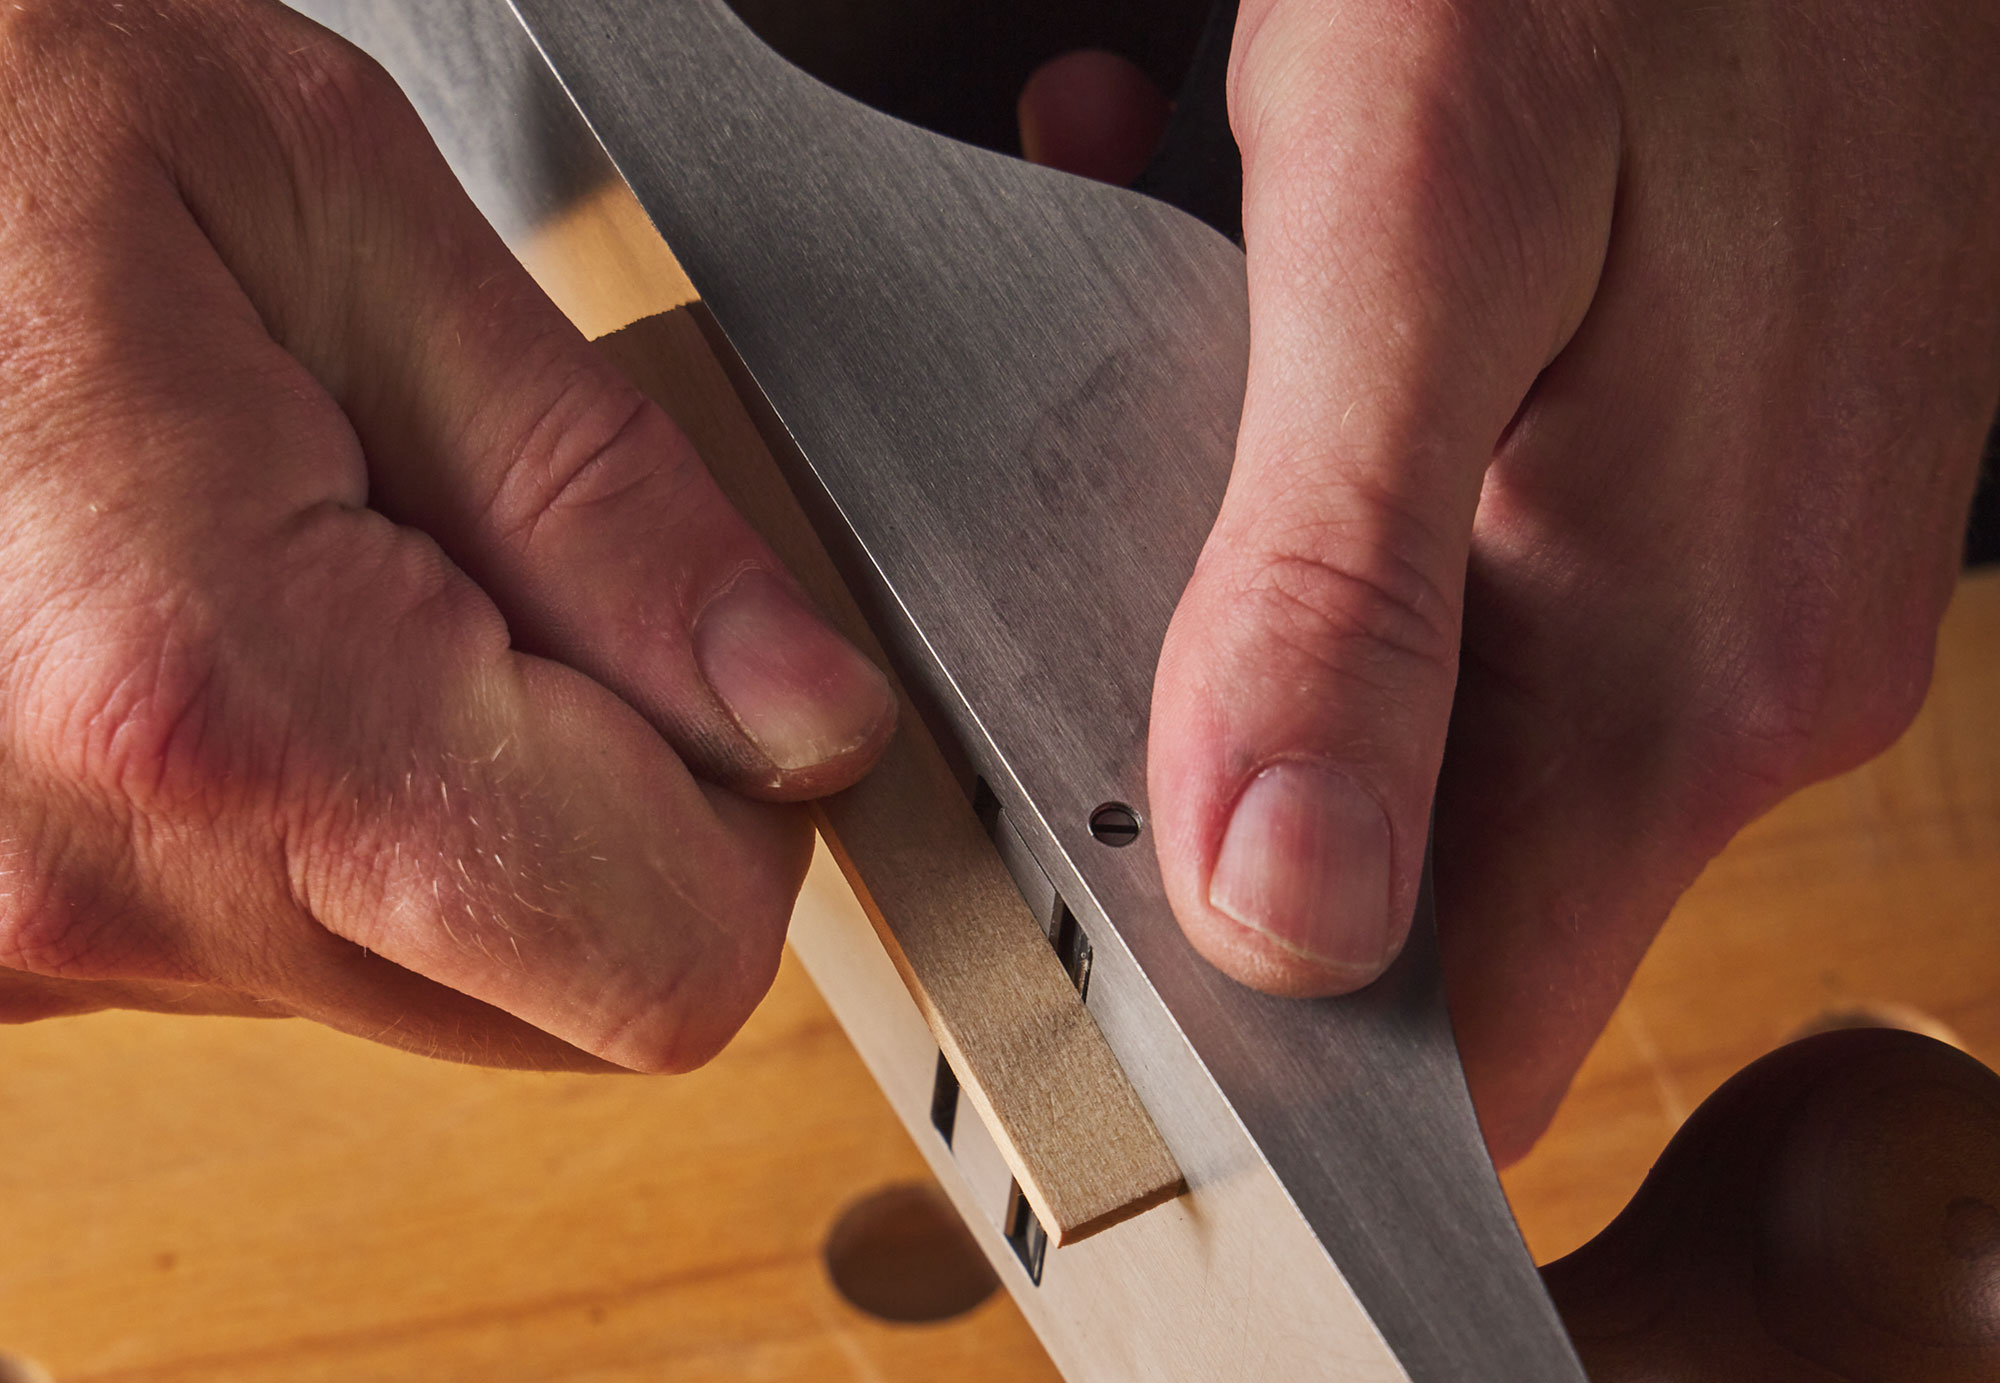 Setting the blade with a scrap of wood